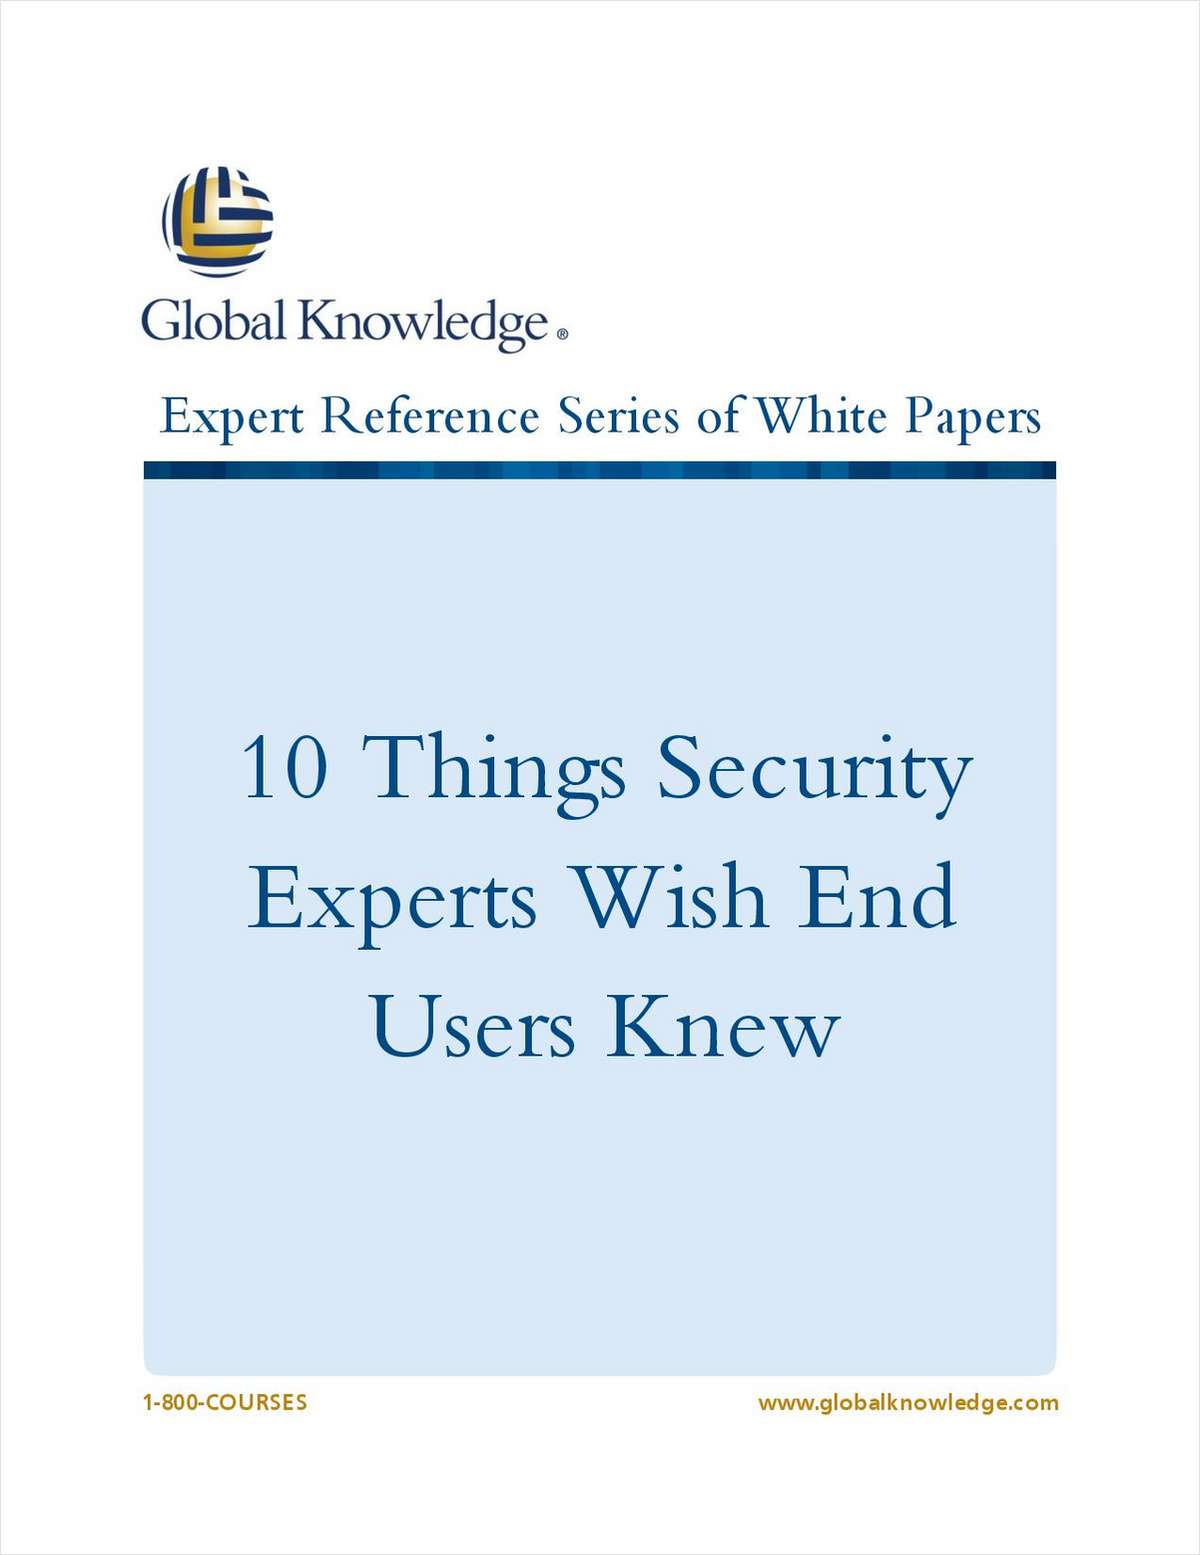 10 Things Security Experts Wish End Users Knew